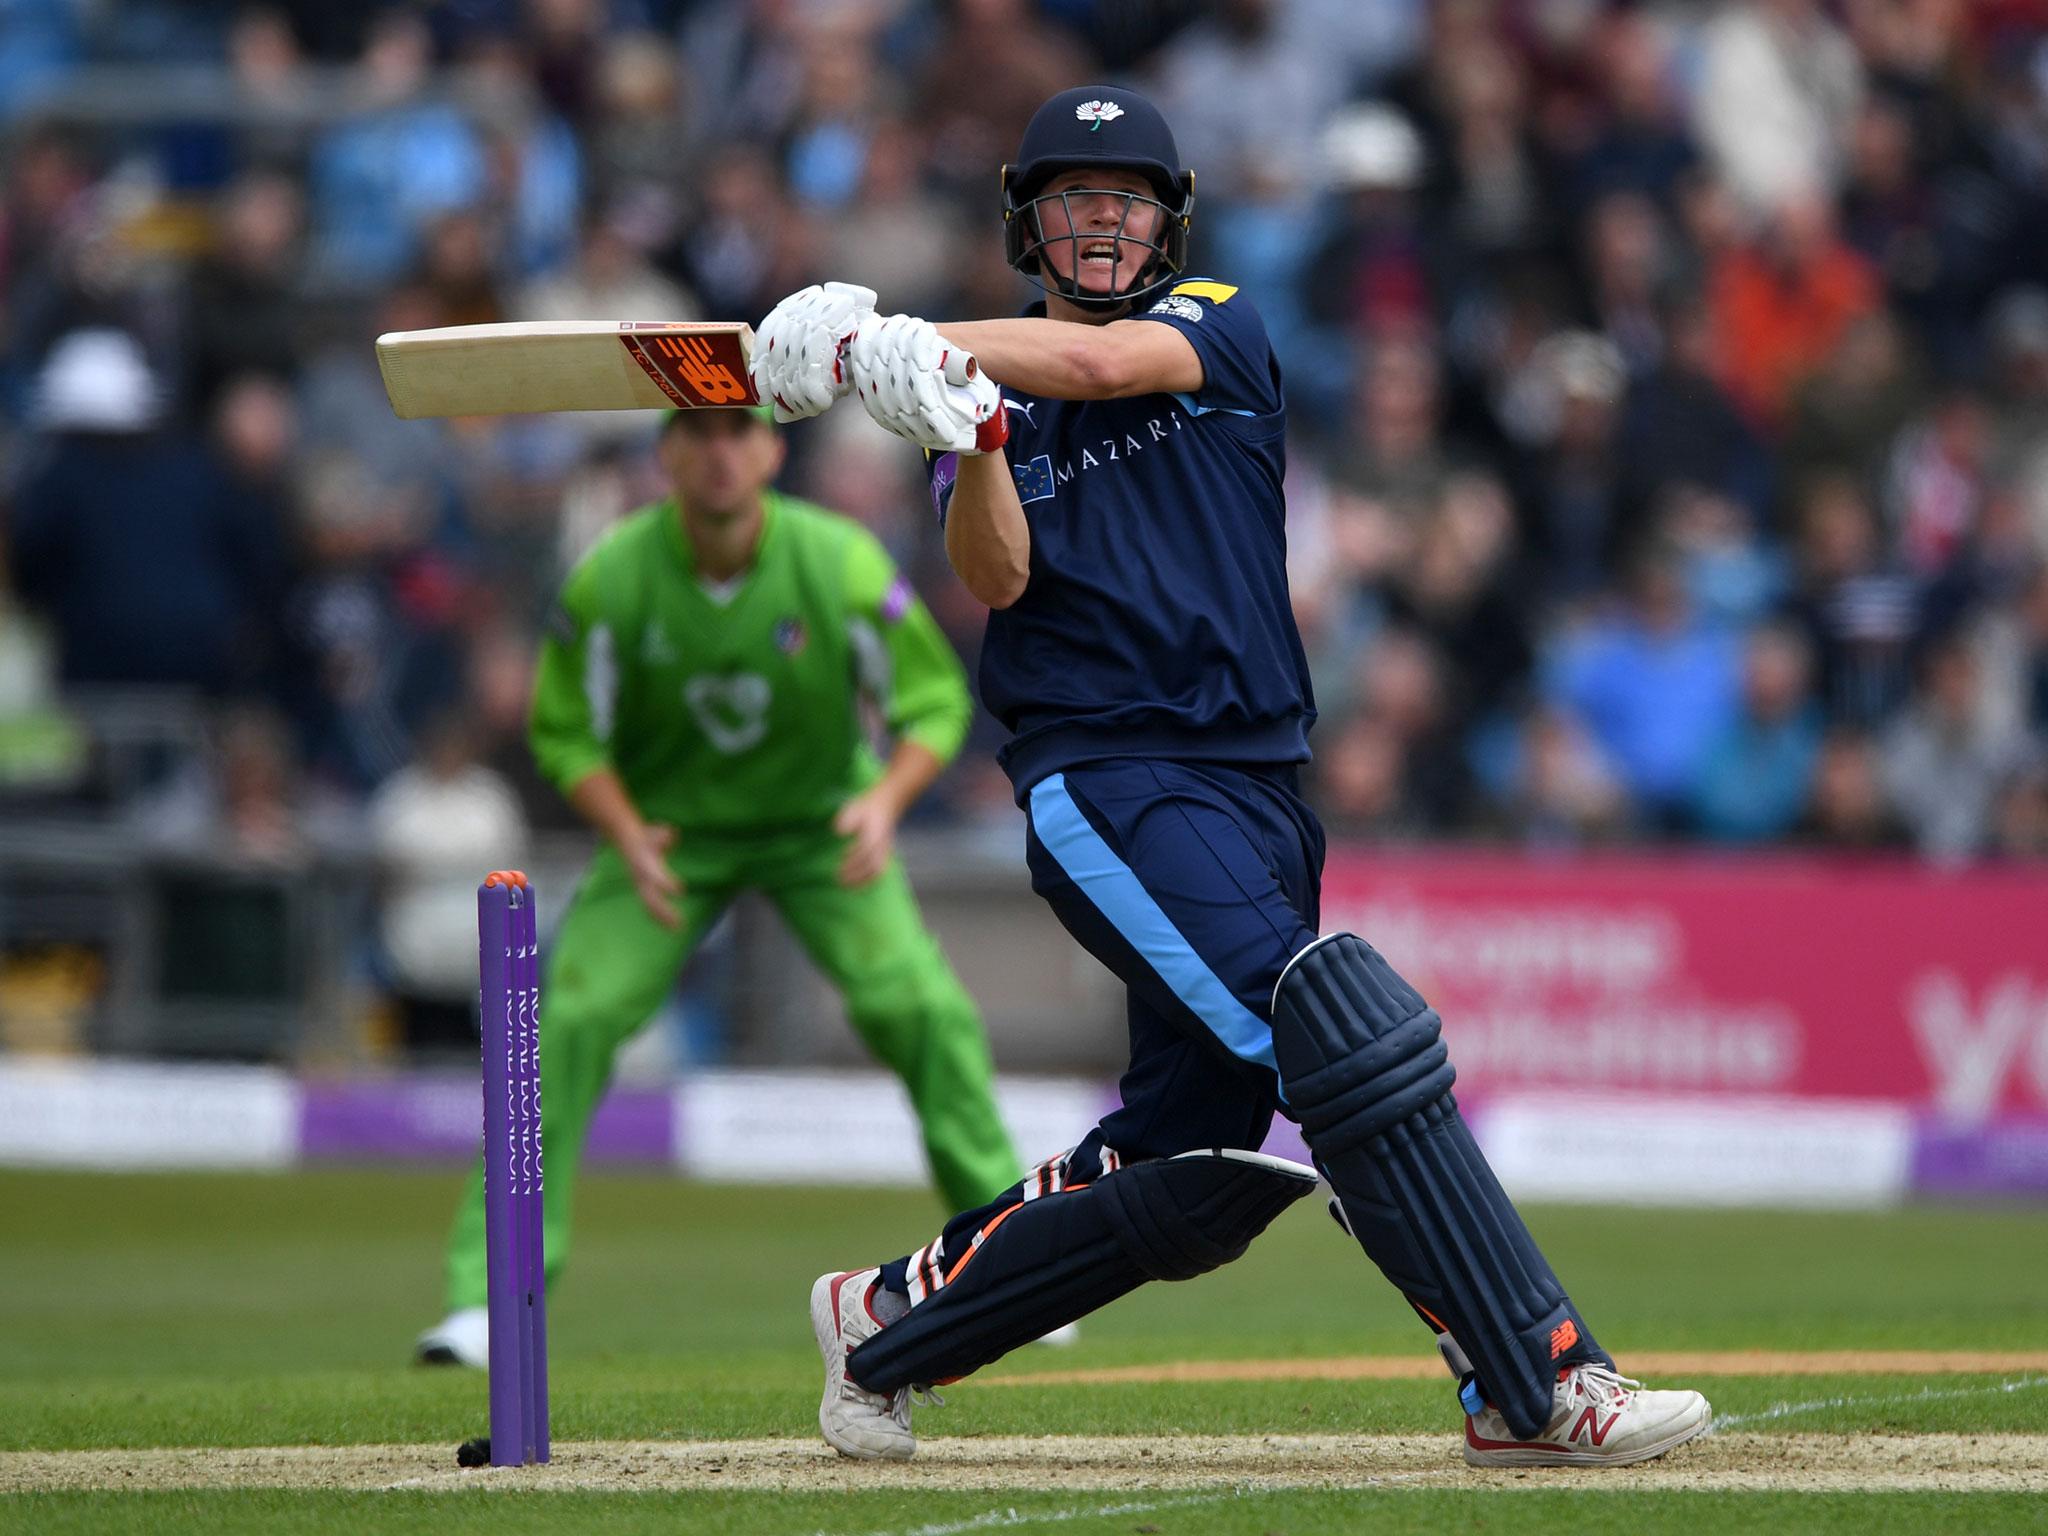 Gary Ballance has doubled down on what brought him previous Test success